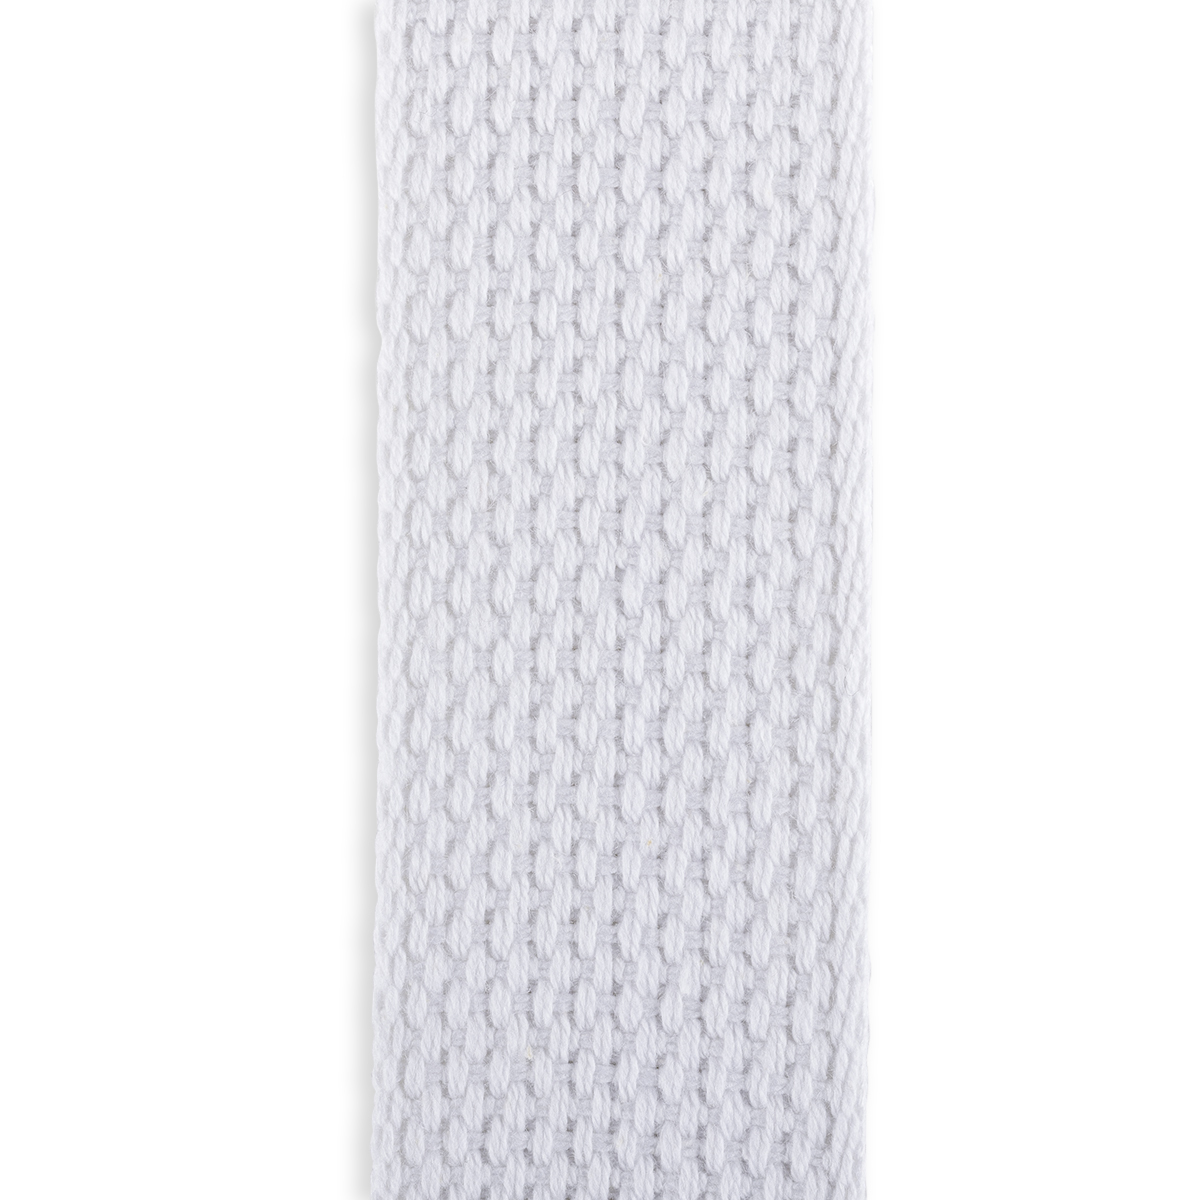 Heavy Cotton Webbing 1 1/2 inch - Straps for Arts and Crafts - (White, 10 Yards) - Matador Useful Goods